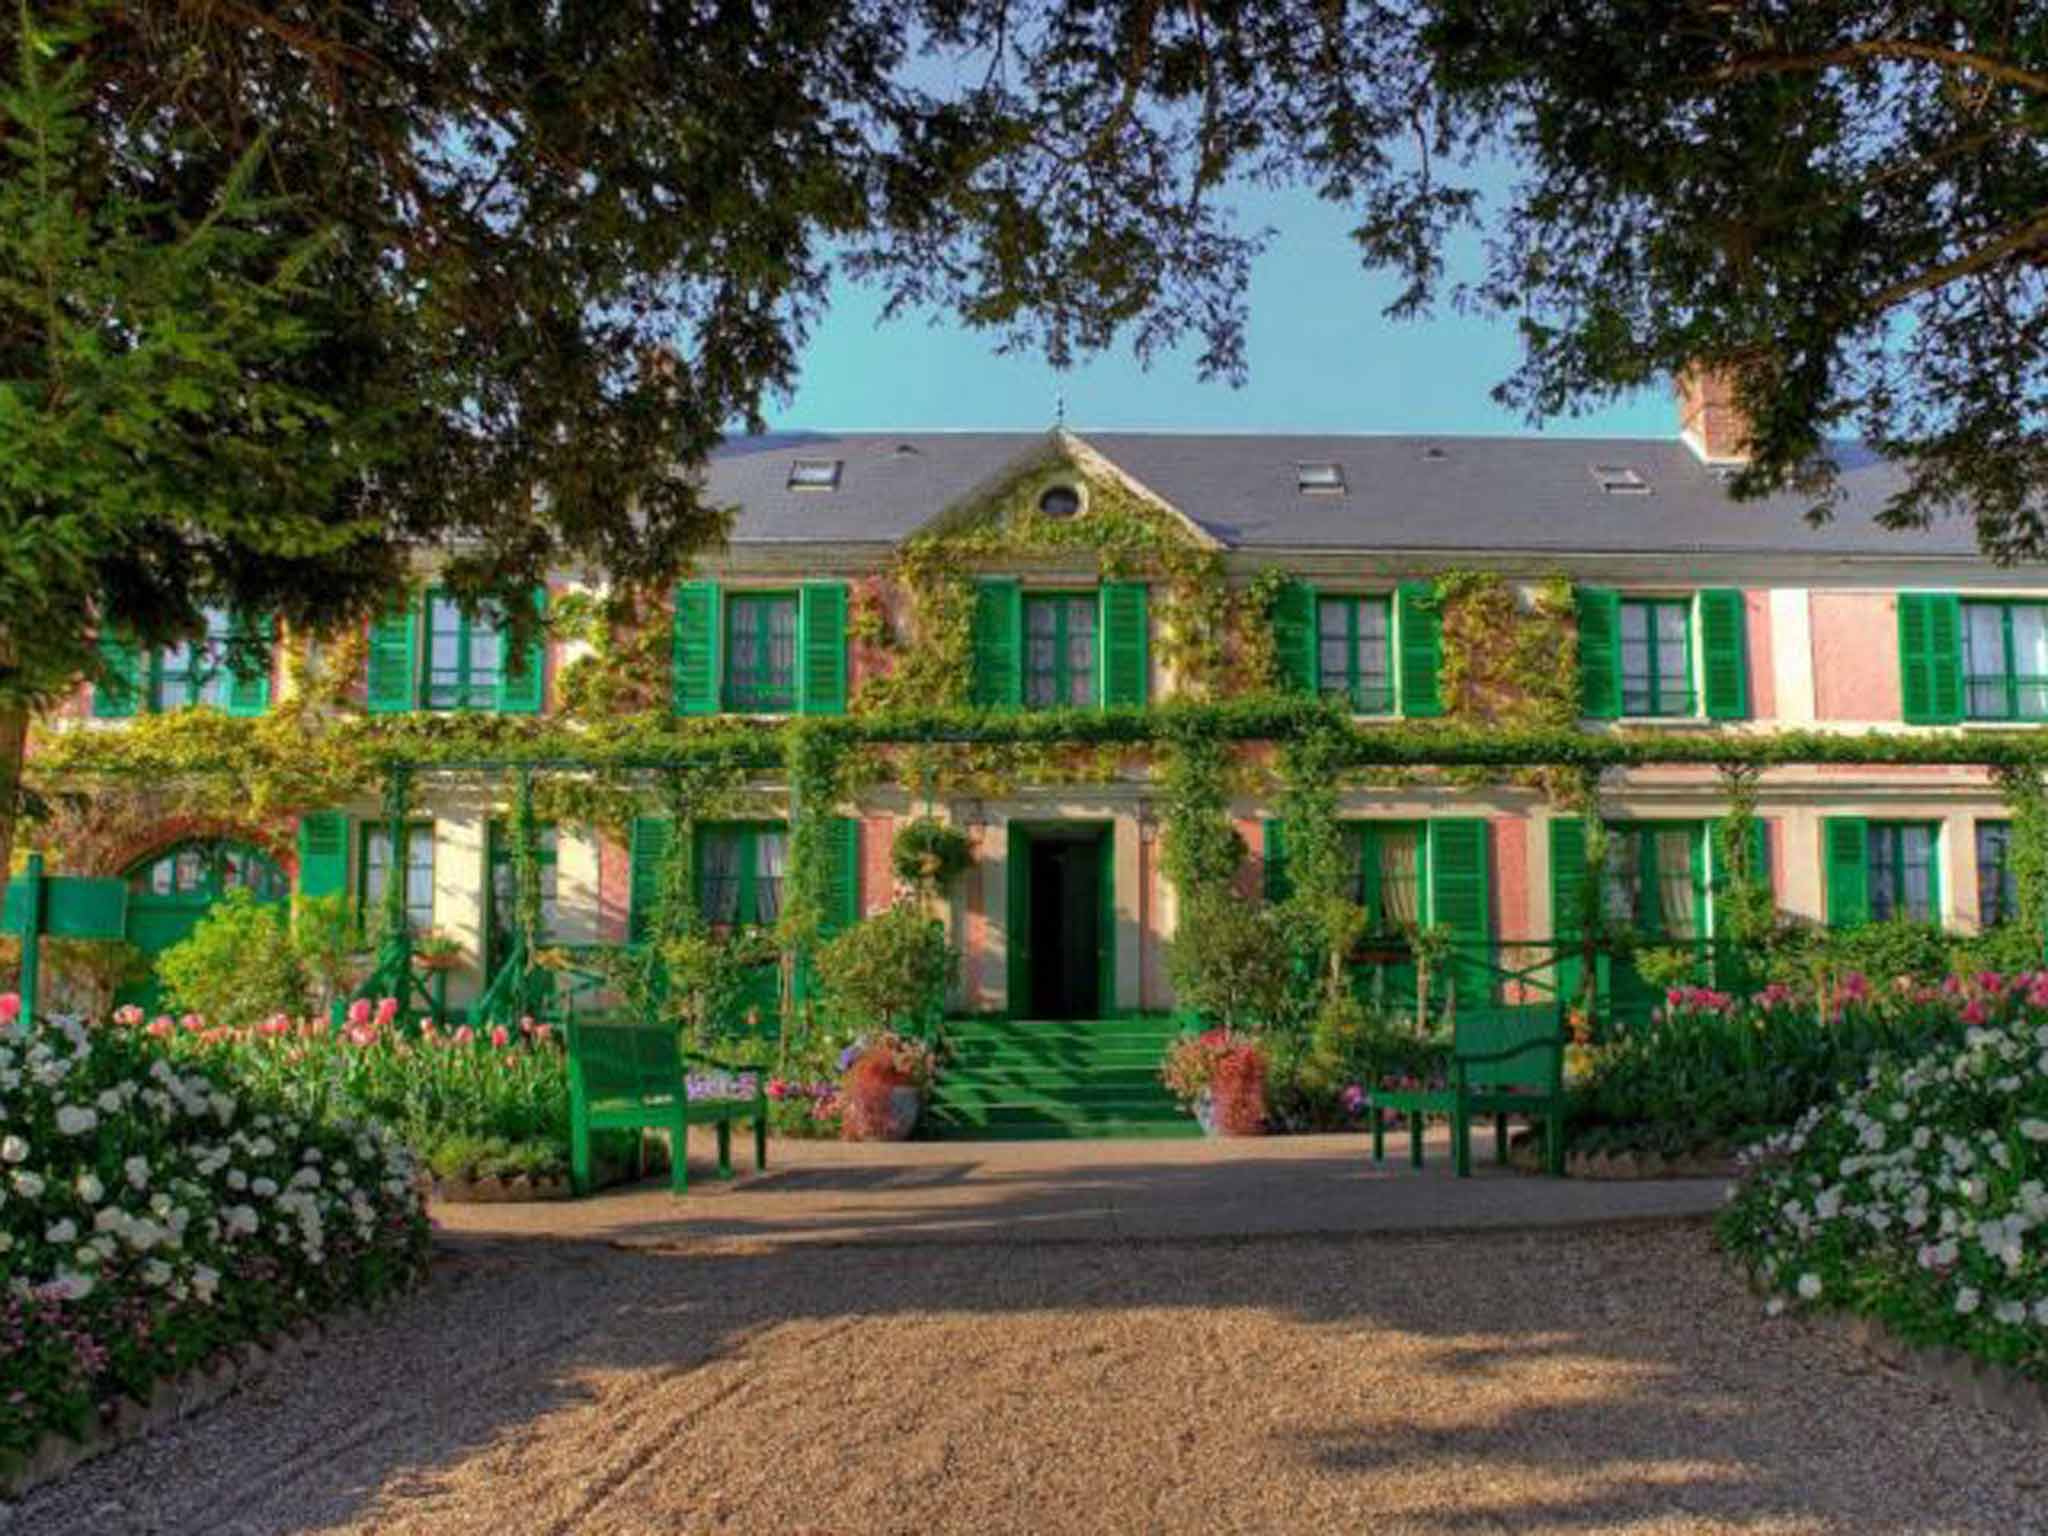 Green fingers: Monet's house and garden at Giverny